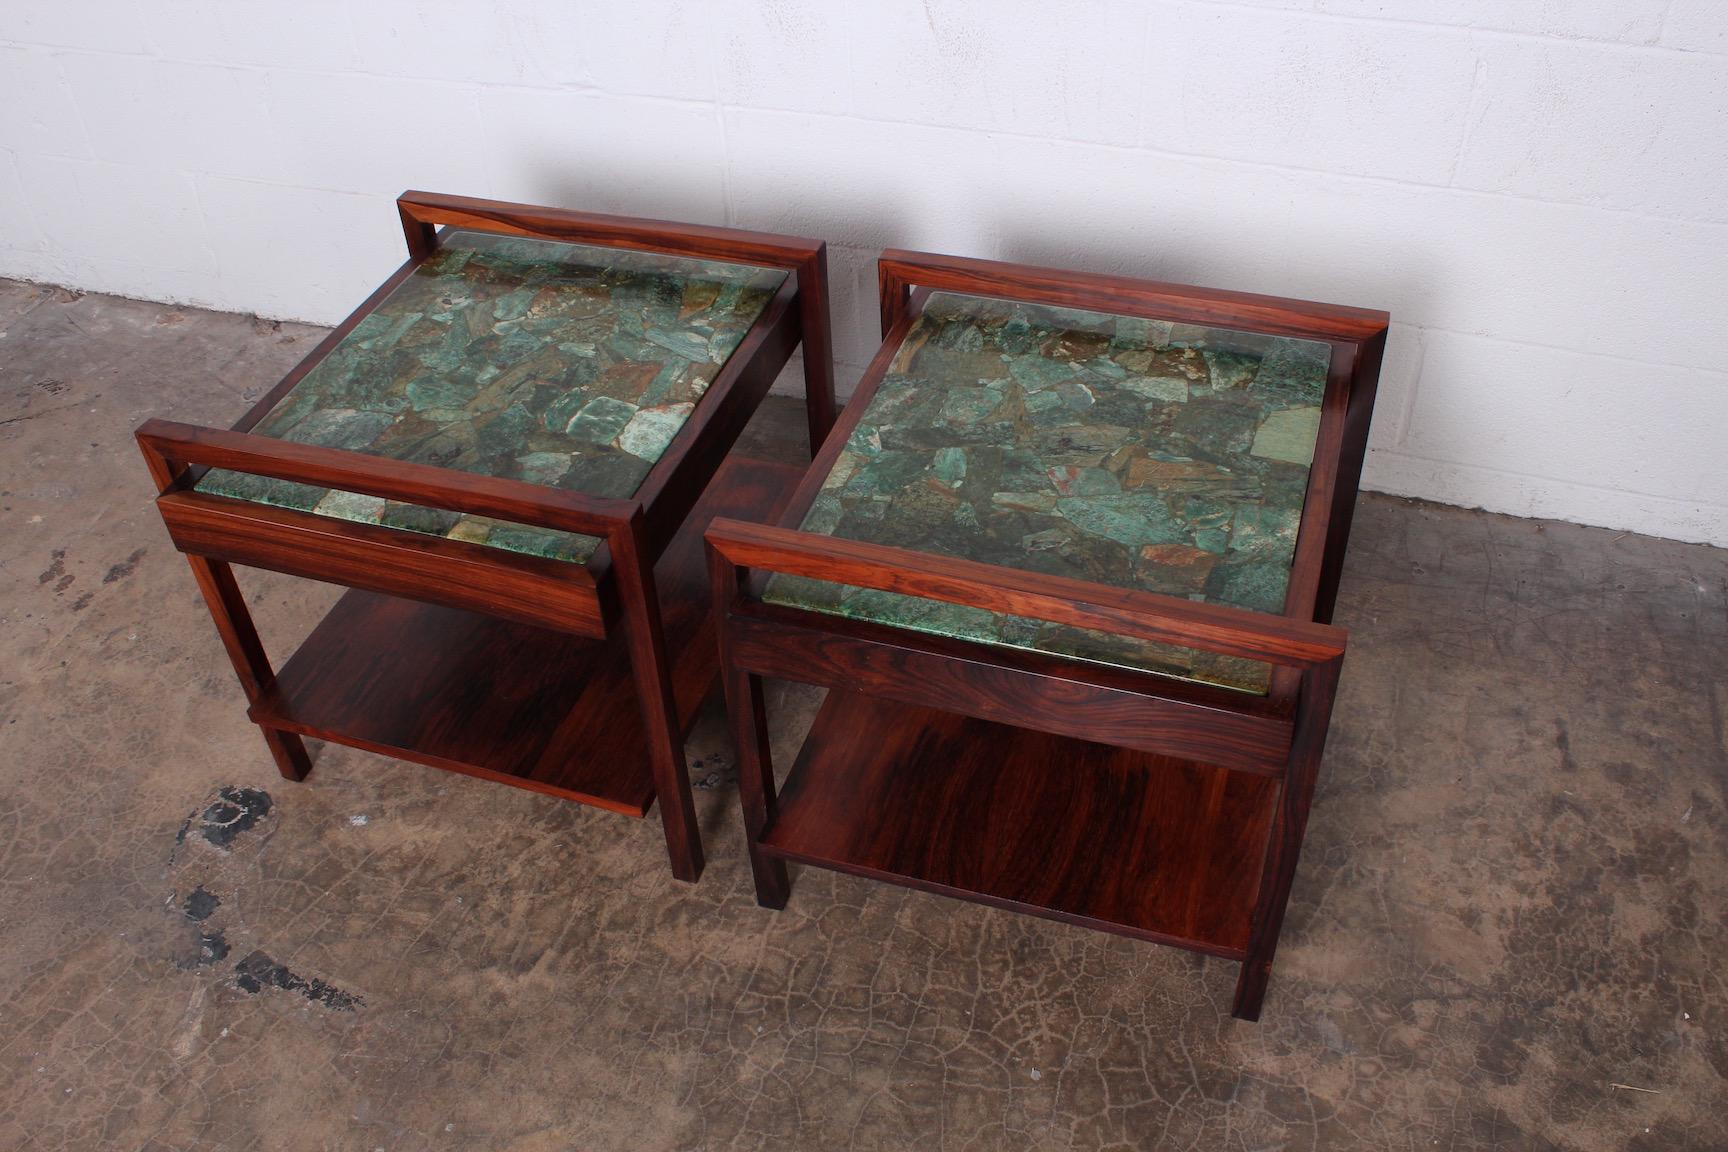 Pair of Rosewood and Agate Tables (Mitte des 20. Jahrhunderts)